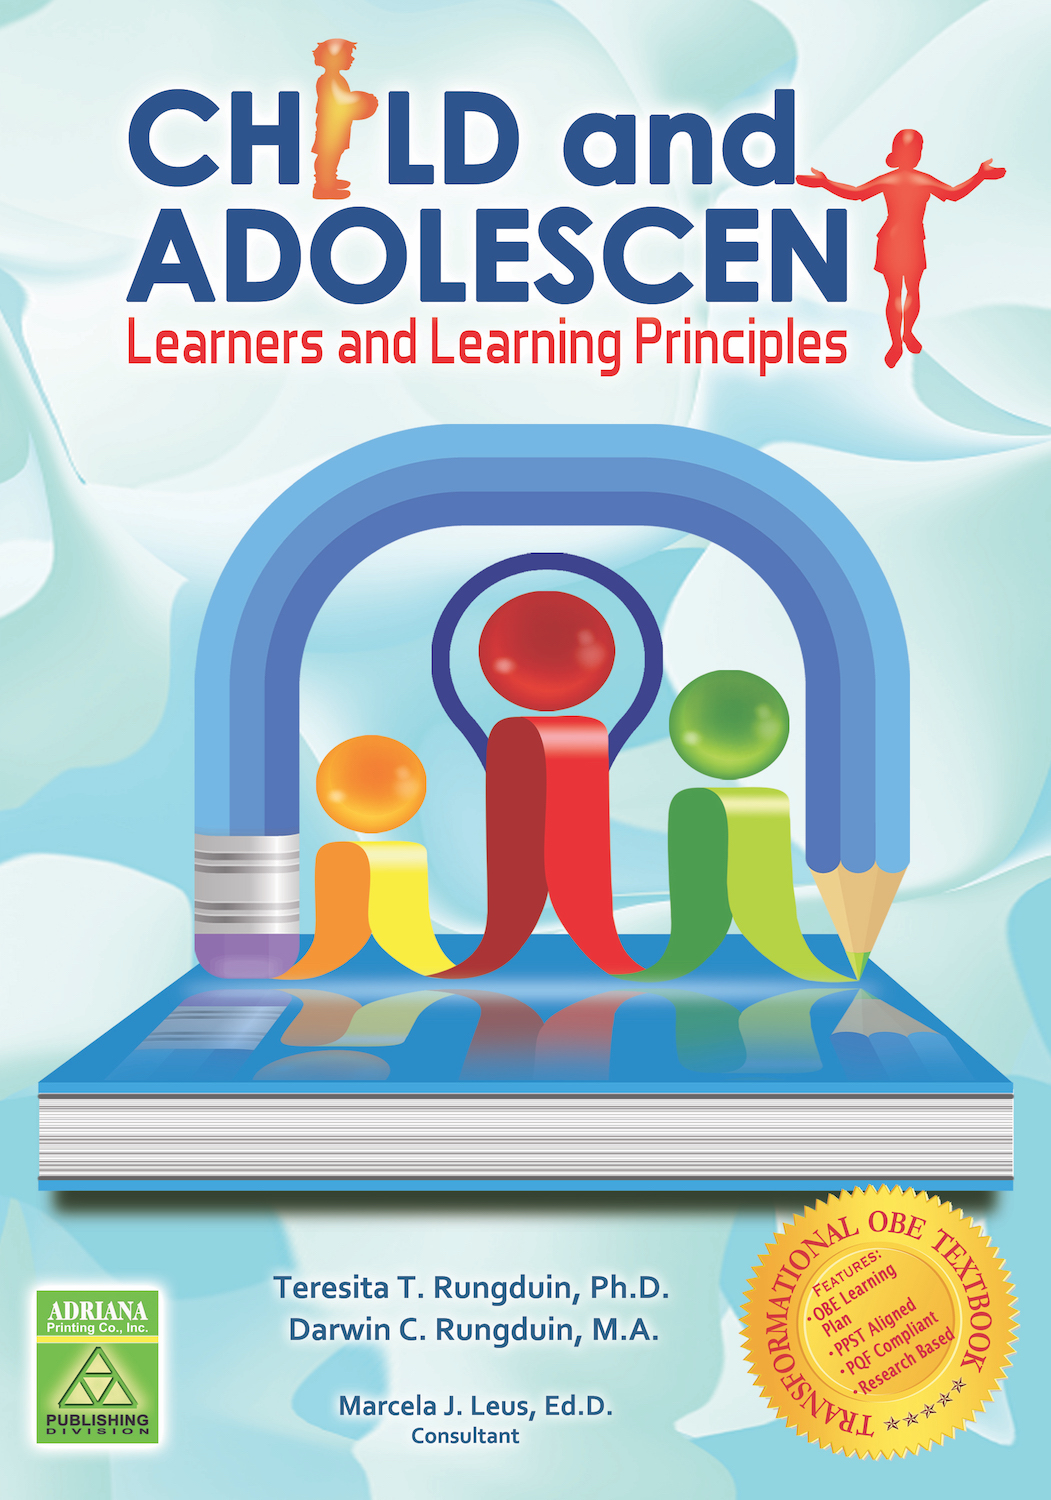 essay about the child and adolescent learners and learning principles